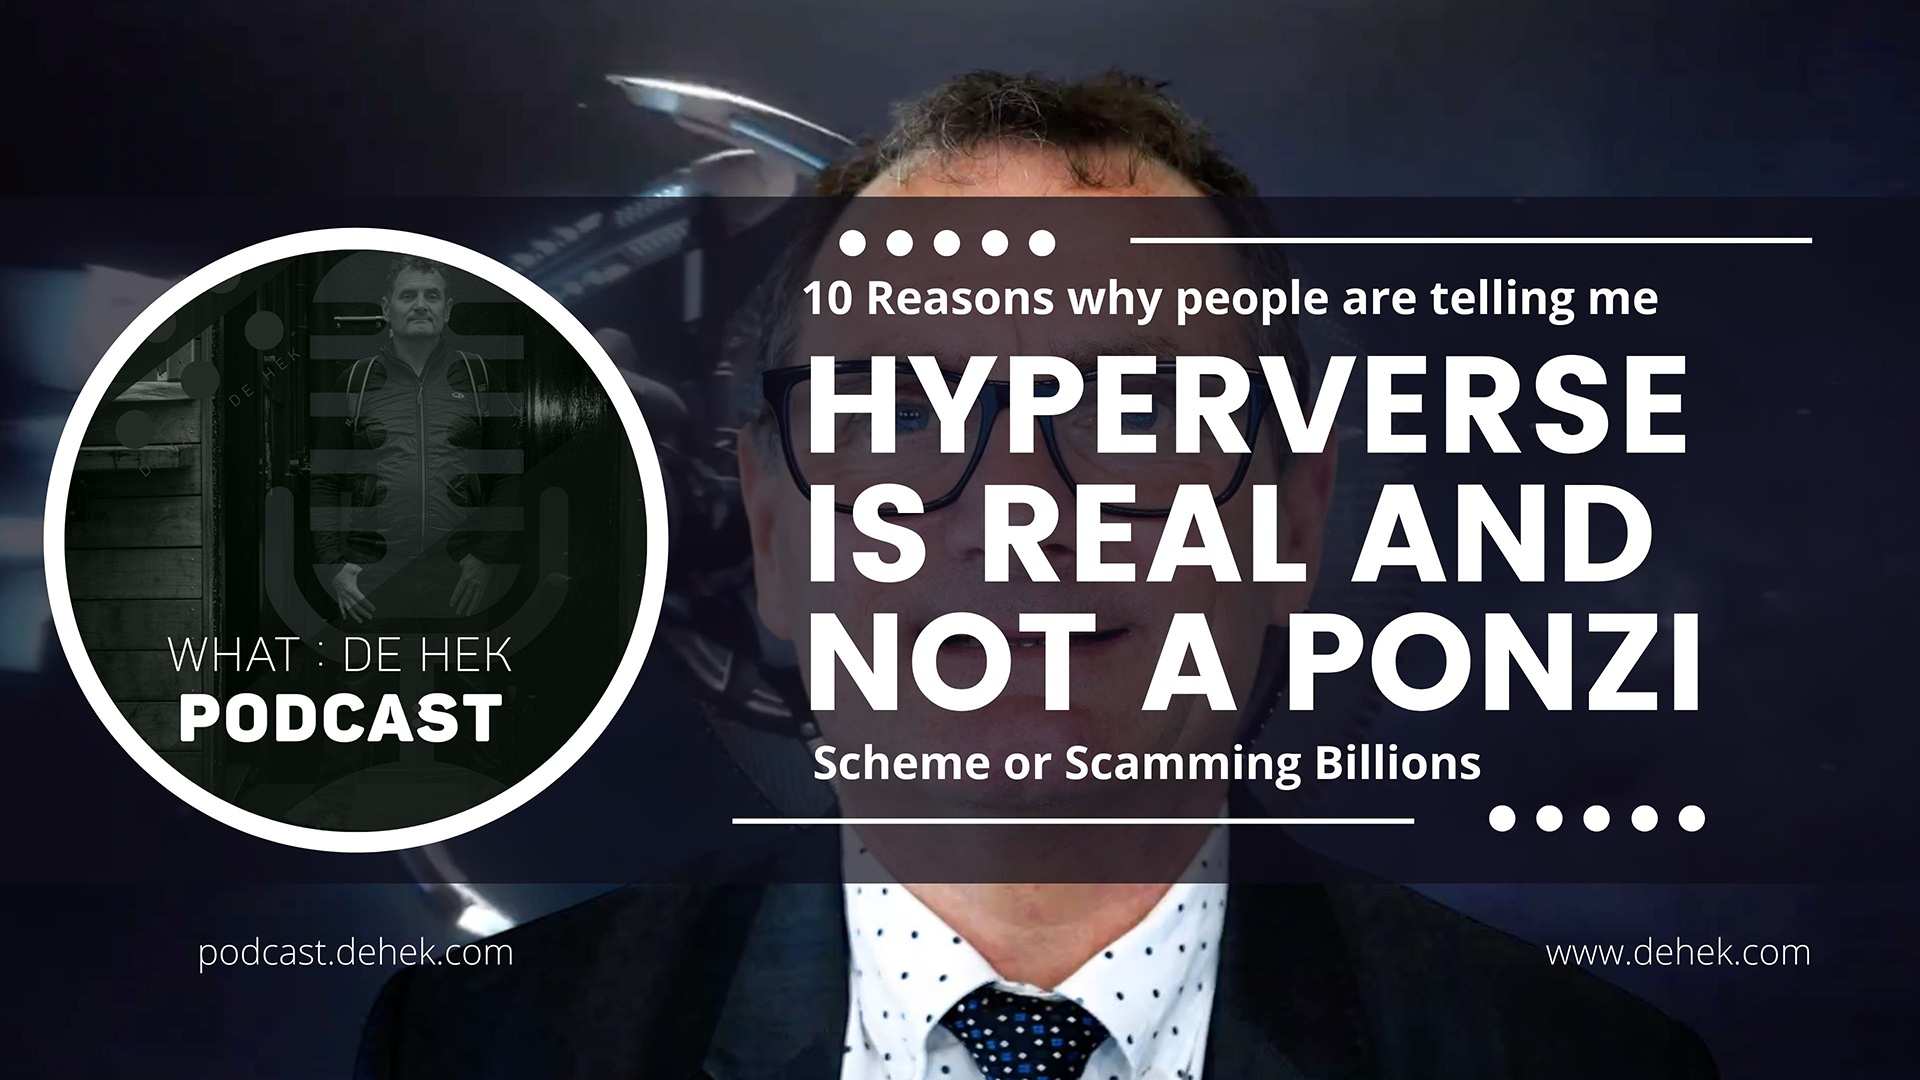 10 Reasons why people are telling me HyperVerse is REAL and NOT a Ponzi Scheme or Scamming Billions Entrepreneur Decision Maker Connector Podcaster Educator